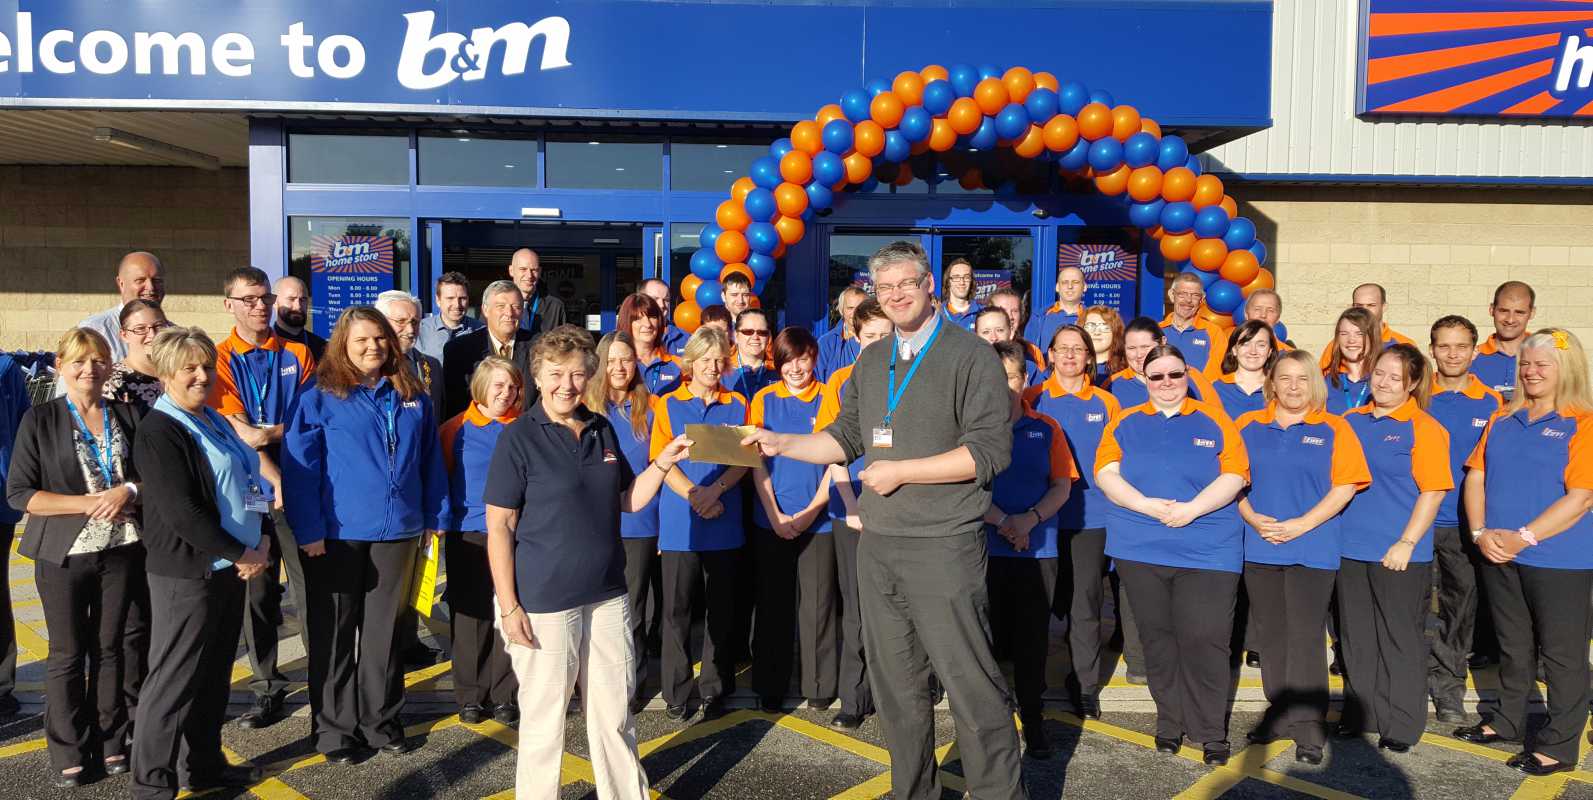 B&M's Local Hero for the opening of B&M Penzance, the RNLI Penlee Lifeboats, gratefully receiving £250 worth of B&M vouchers.